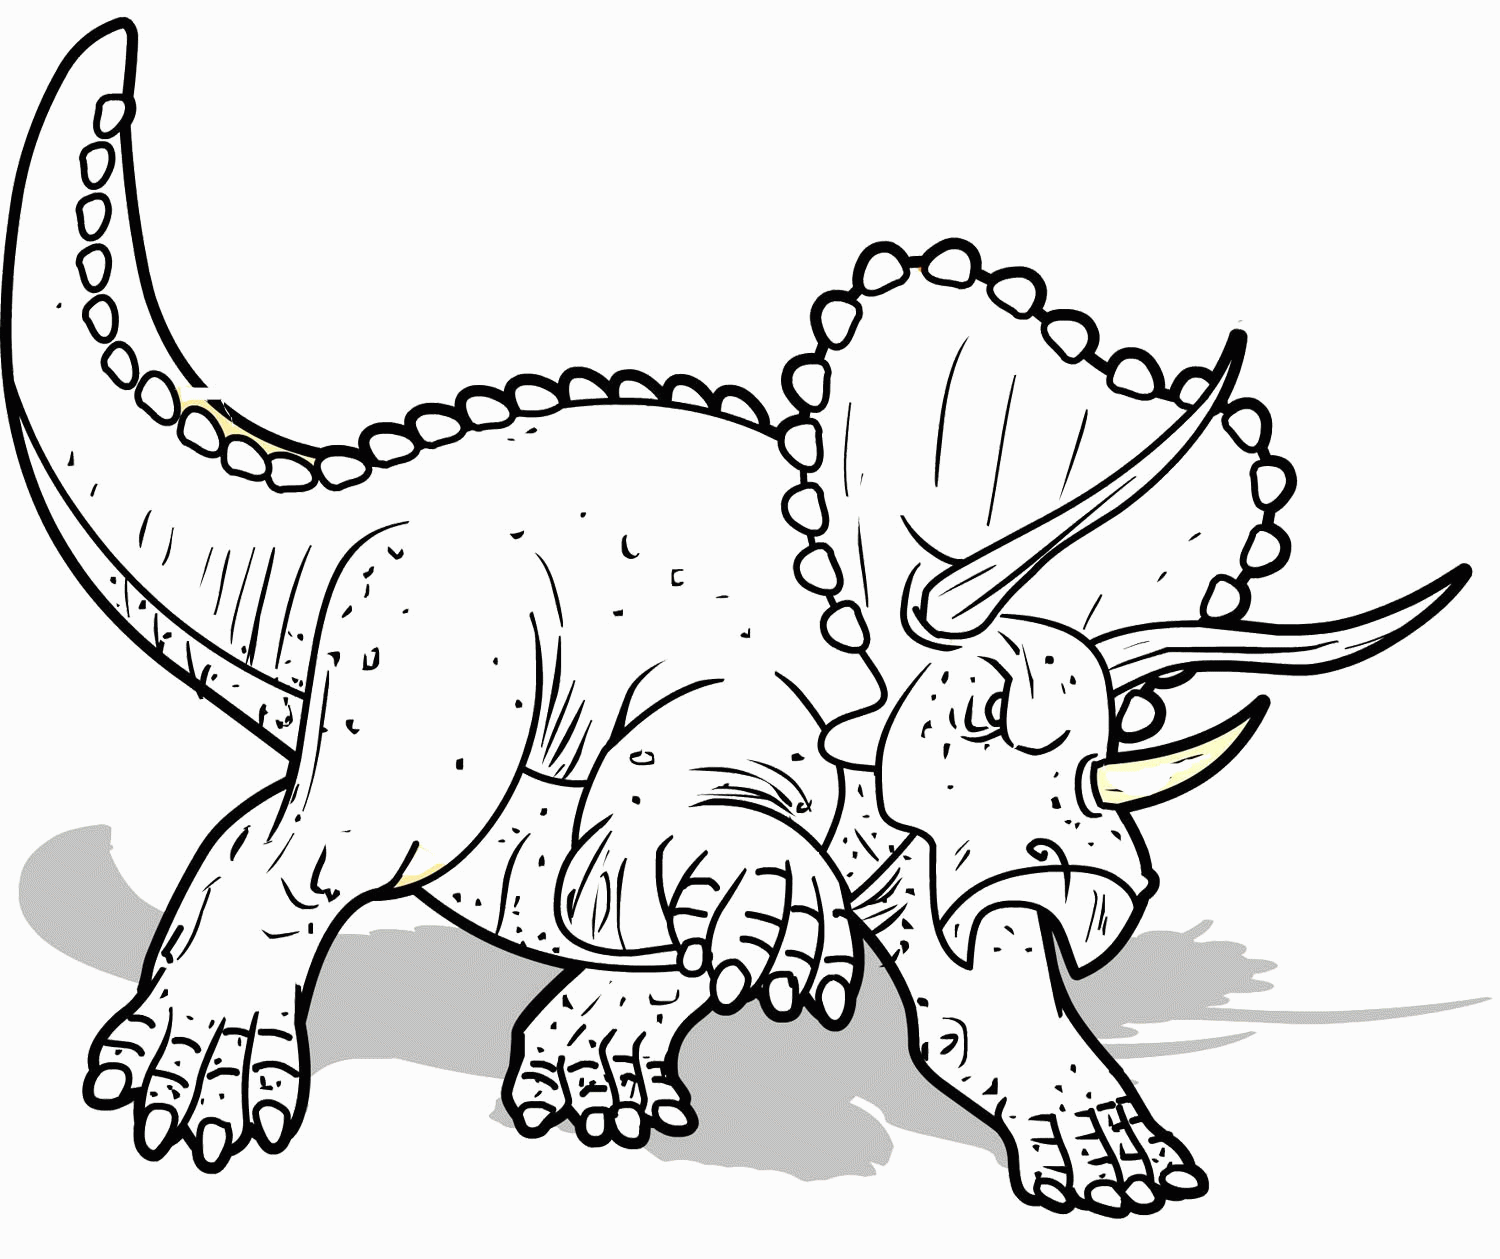 Tee Rex - Free Colouring Pages